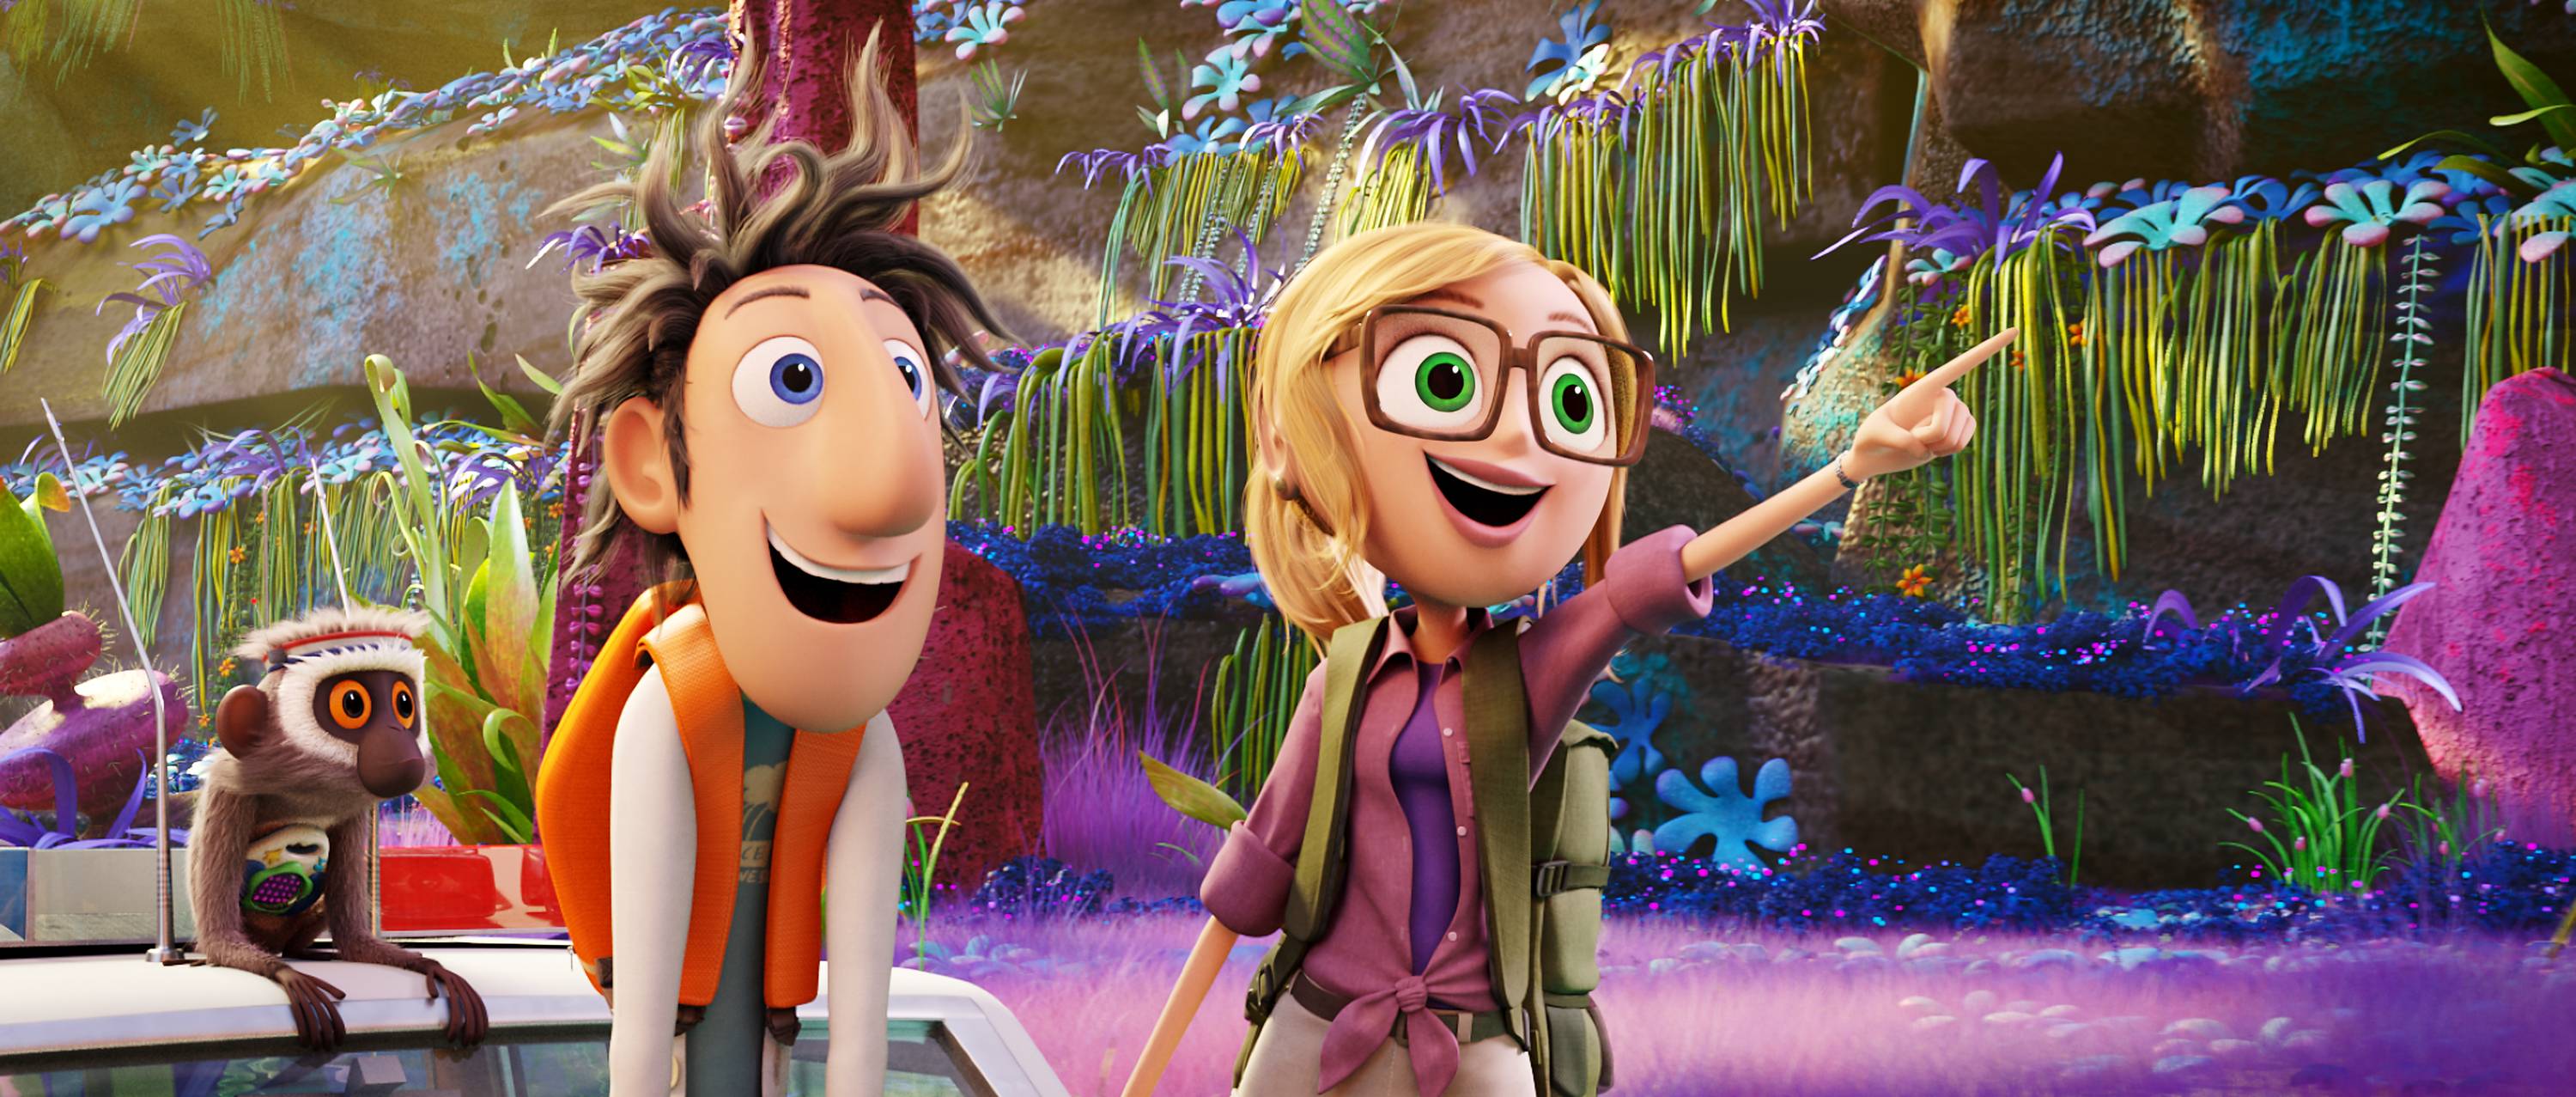 Wallpapers fantasy cartoon Cloudy with a Chance of Meatballs 2 on the desktop